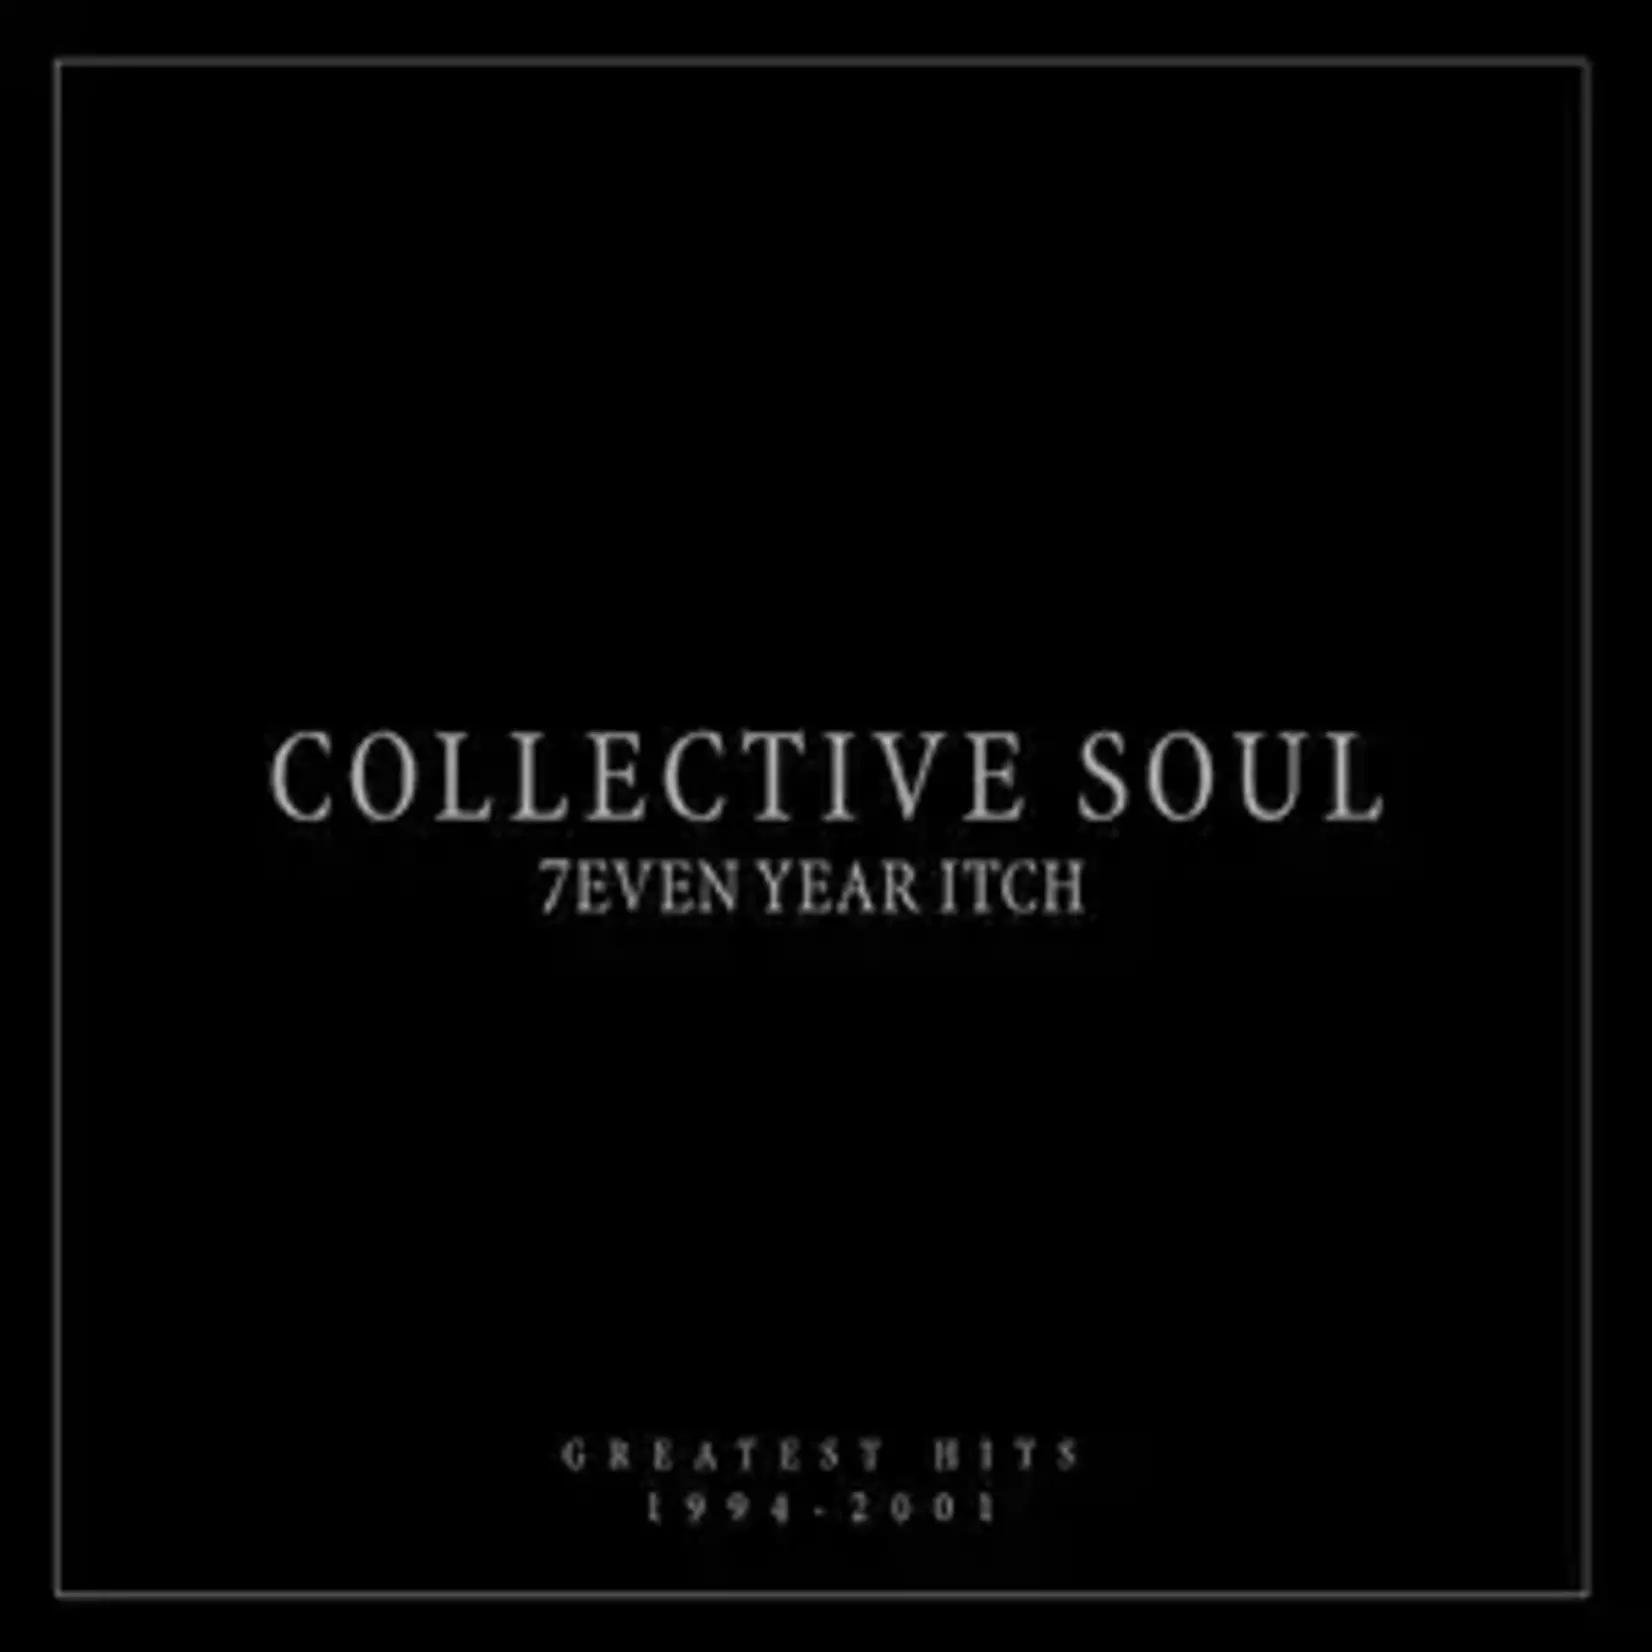 [New] Collective Soul - 7even Year Itch - Greatest Hits 1994-2001